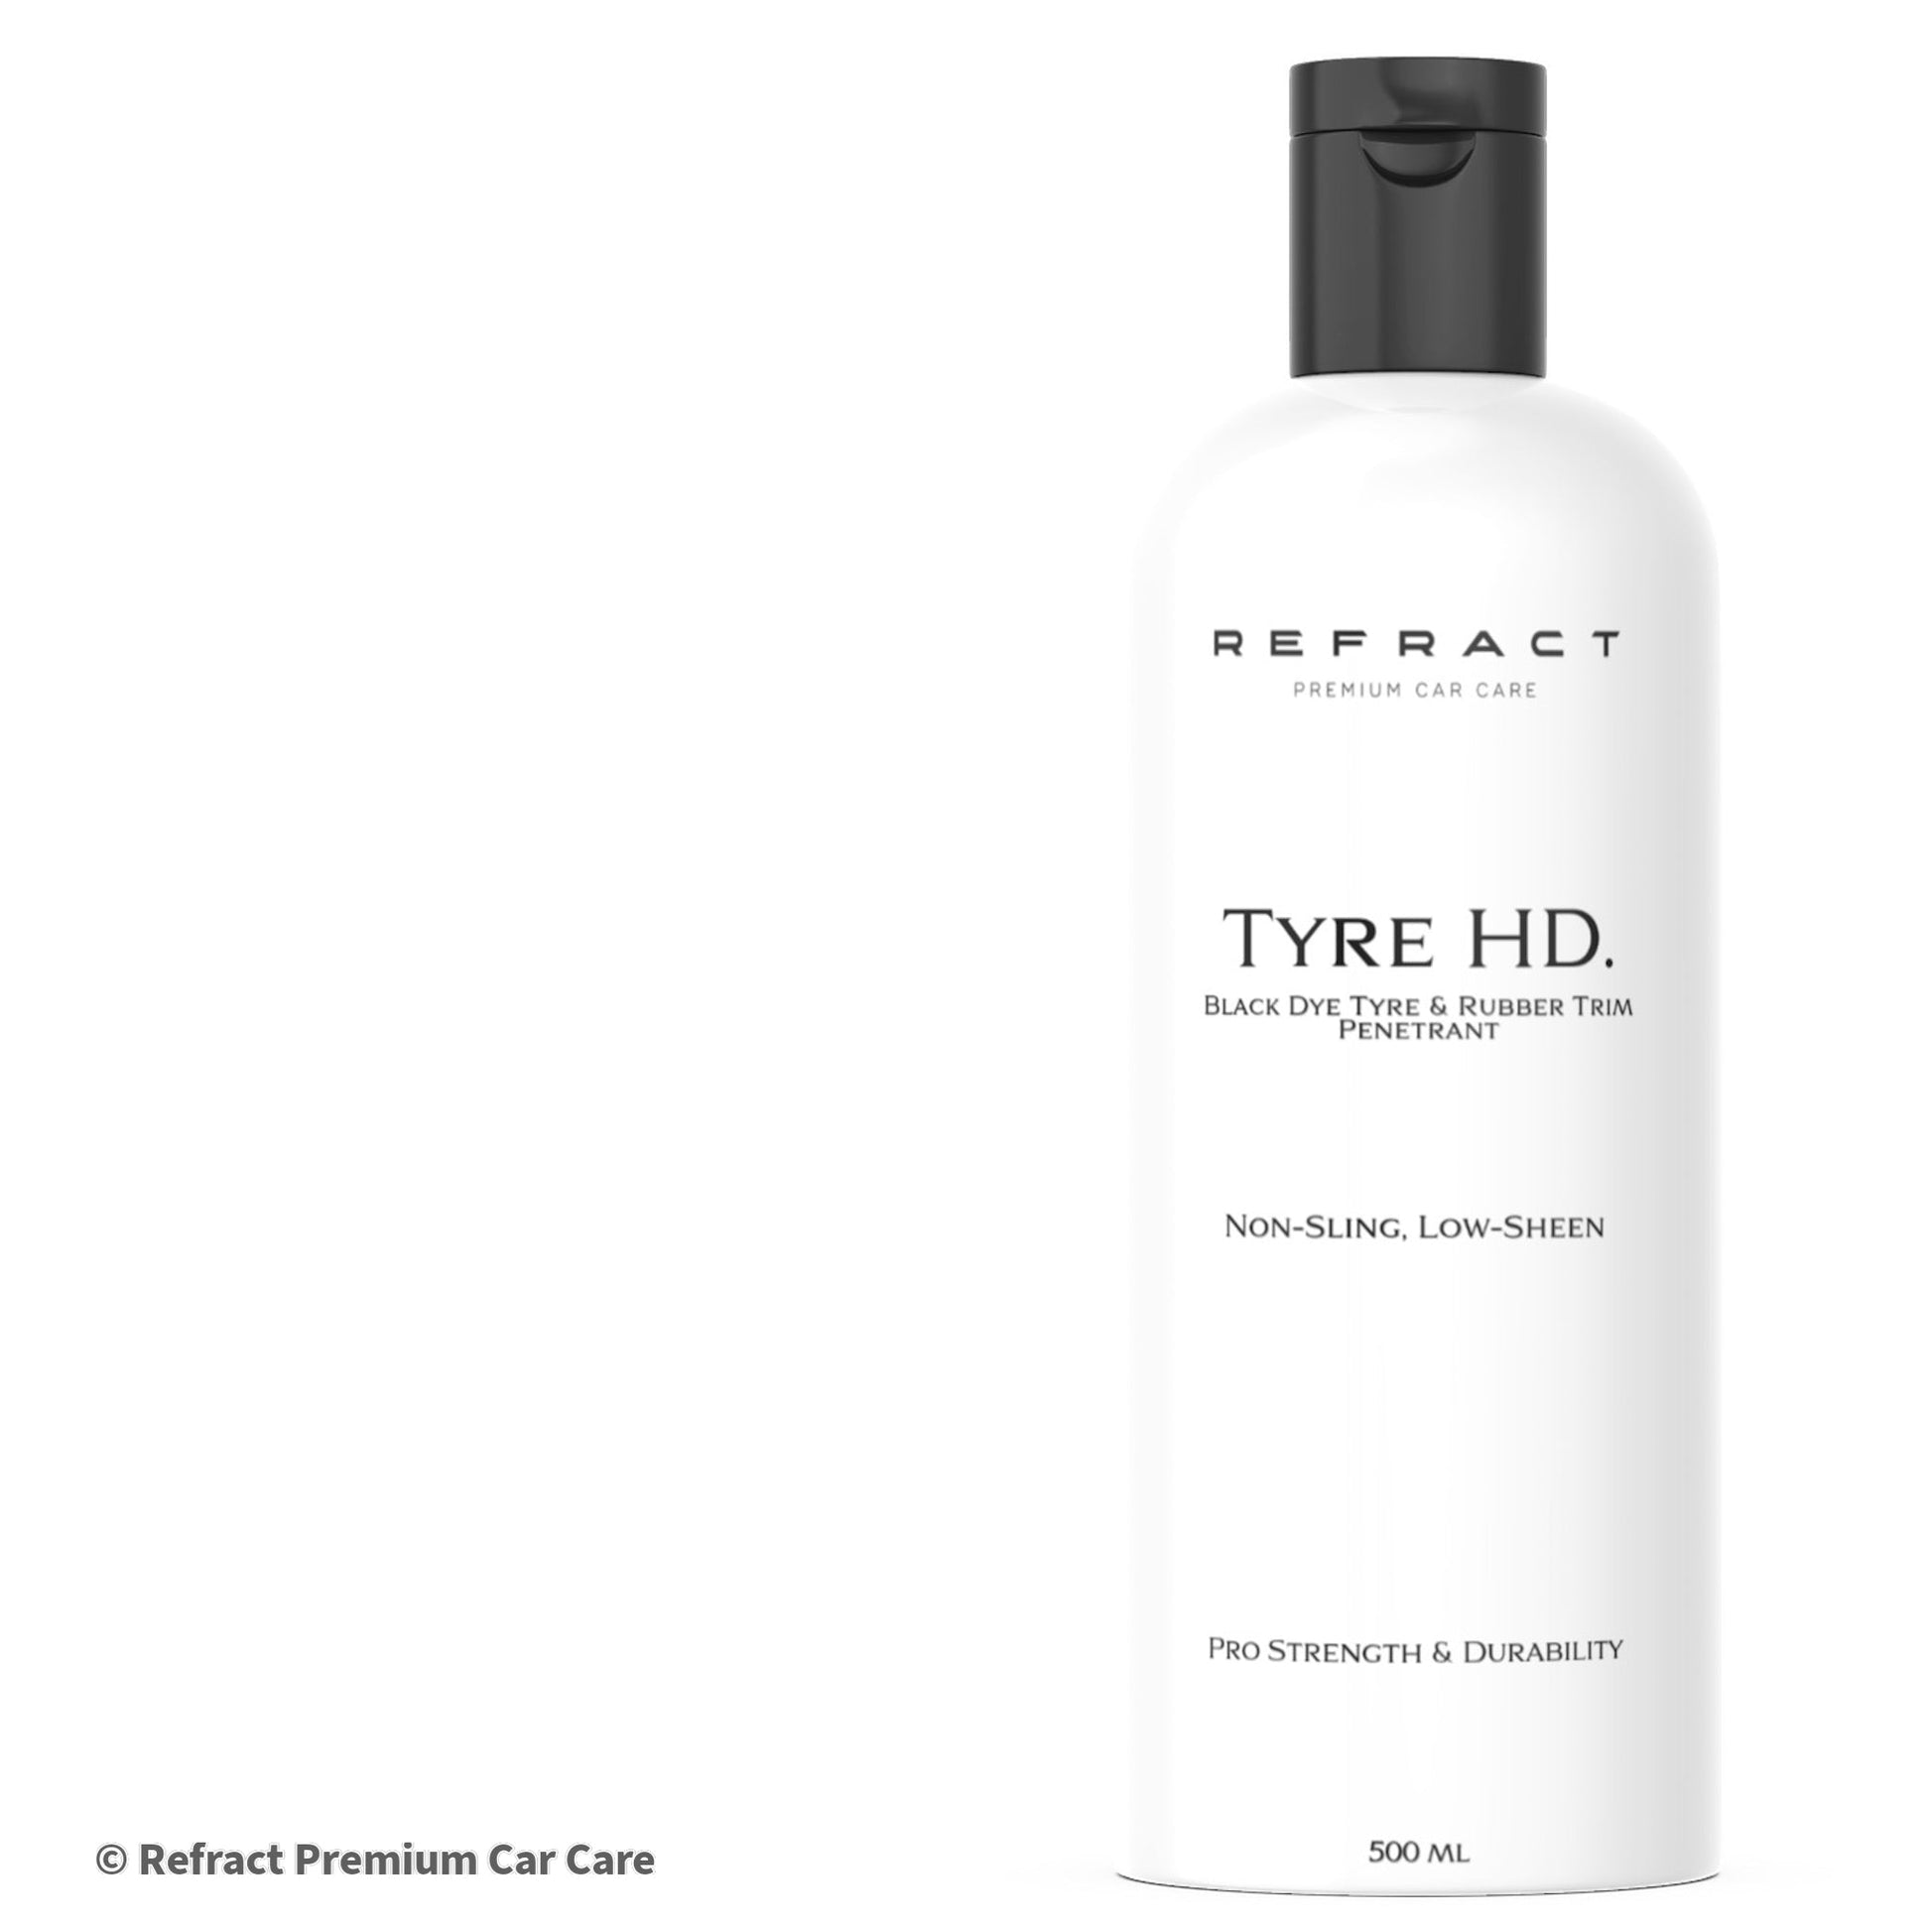 Refract Premium Car Care Products Refract Tyre HD -  Black Dye Tyre & Rubber Trim Penetrant $29.95